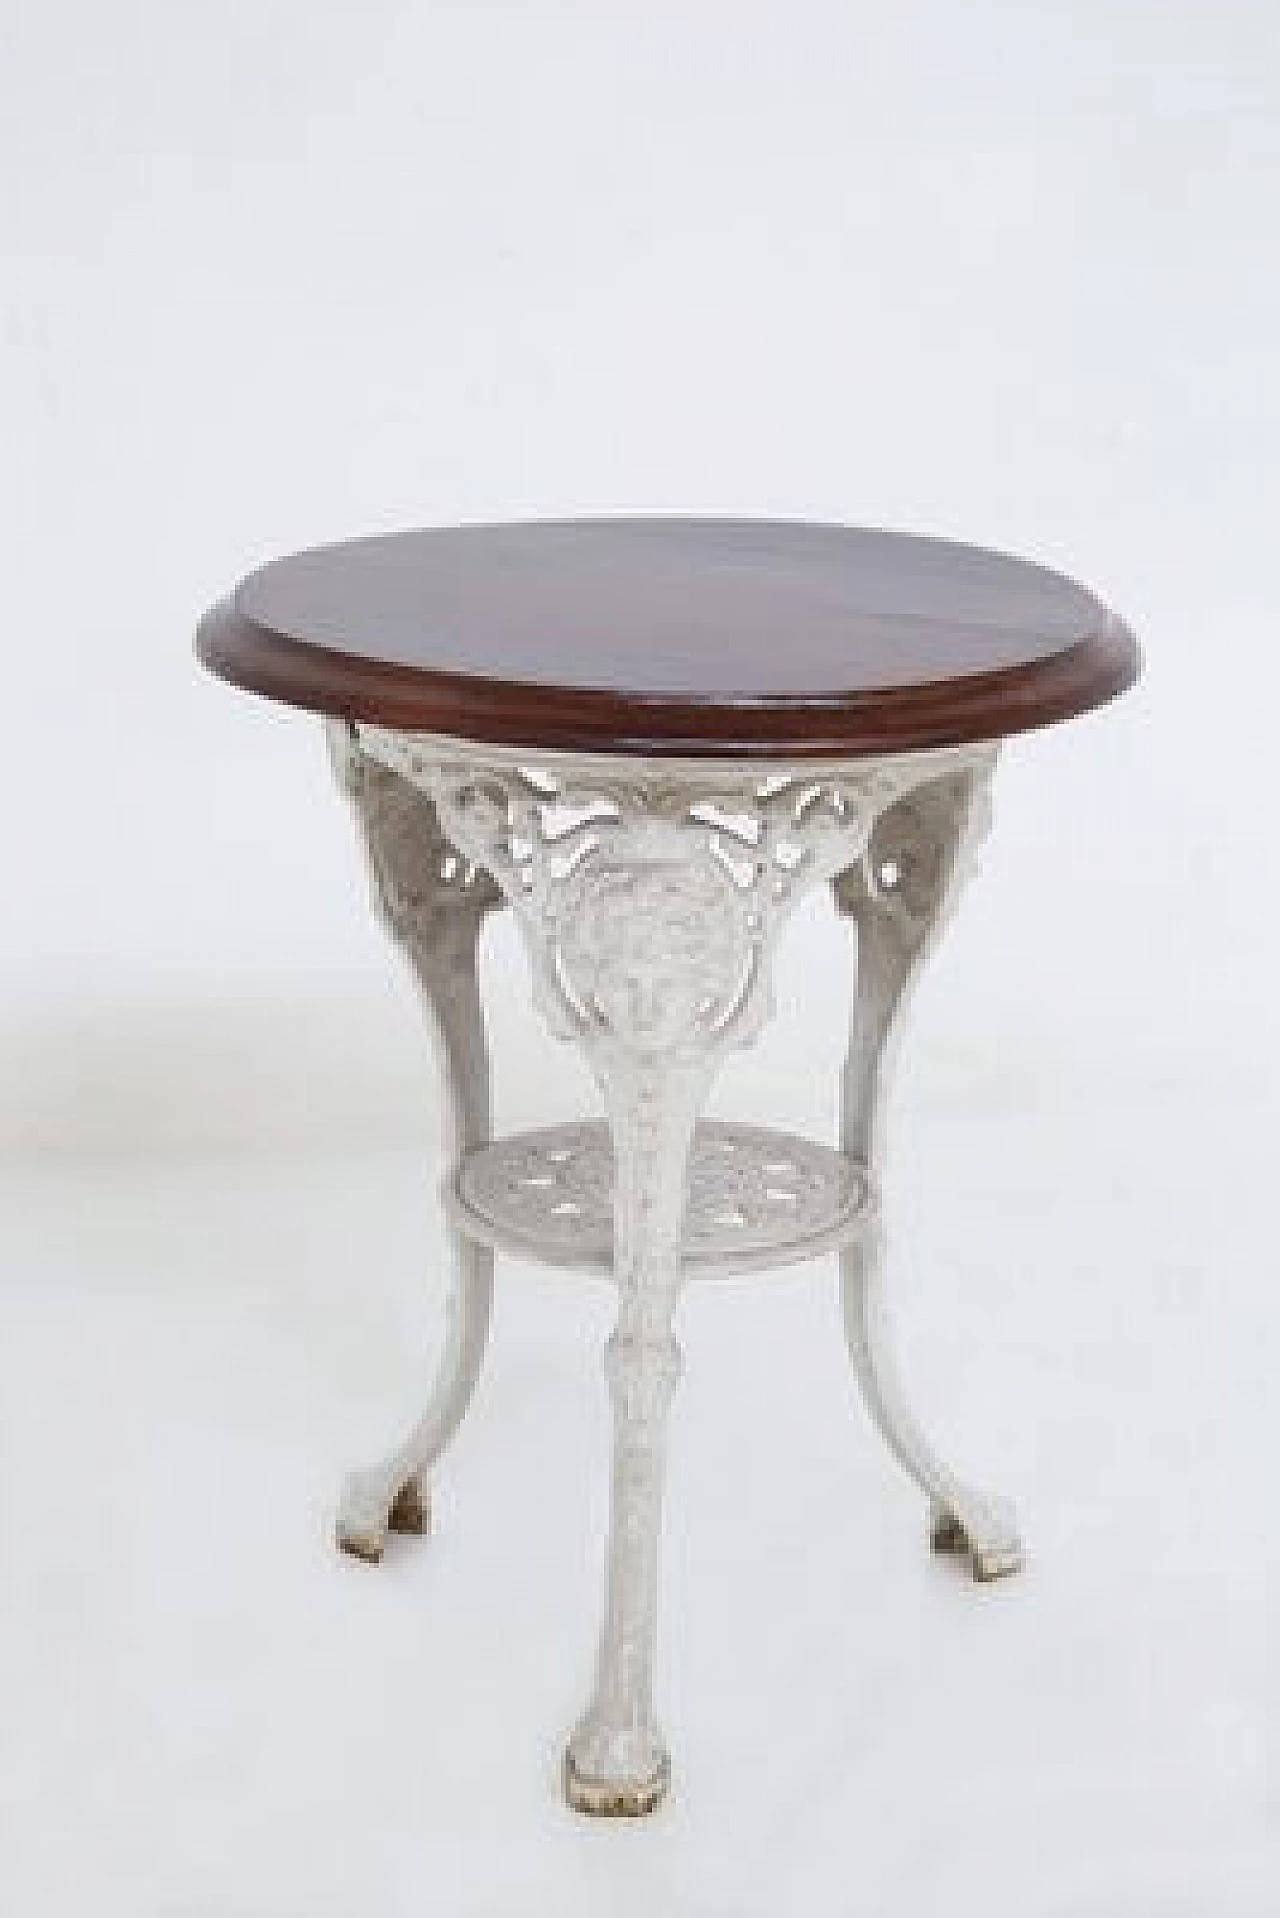 Cast iron table with wooden top, 19th century 10